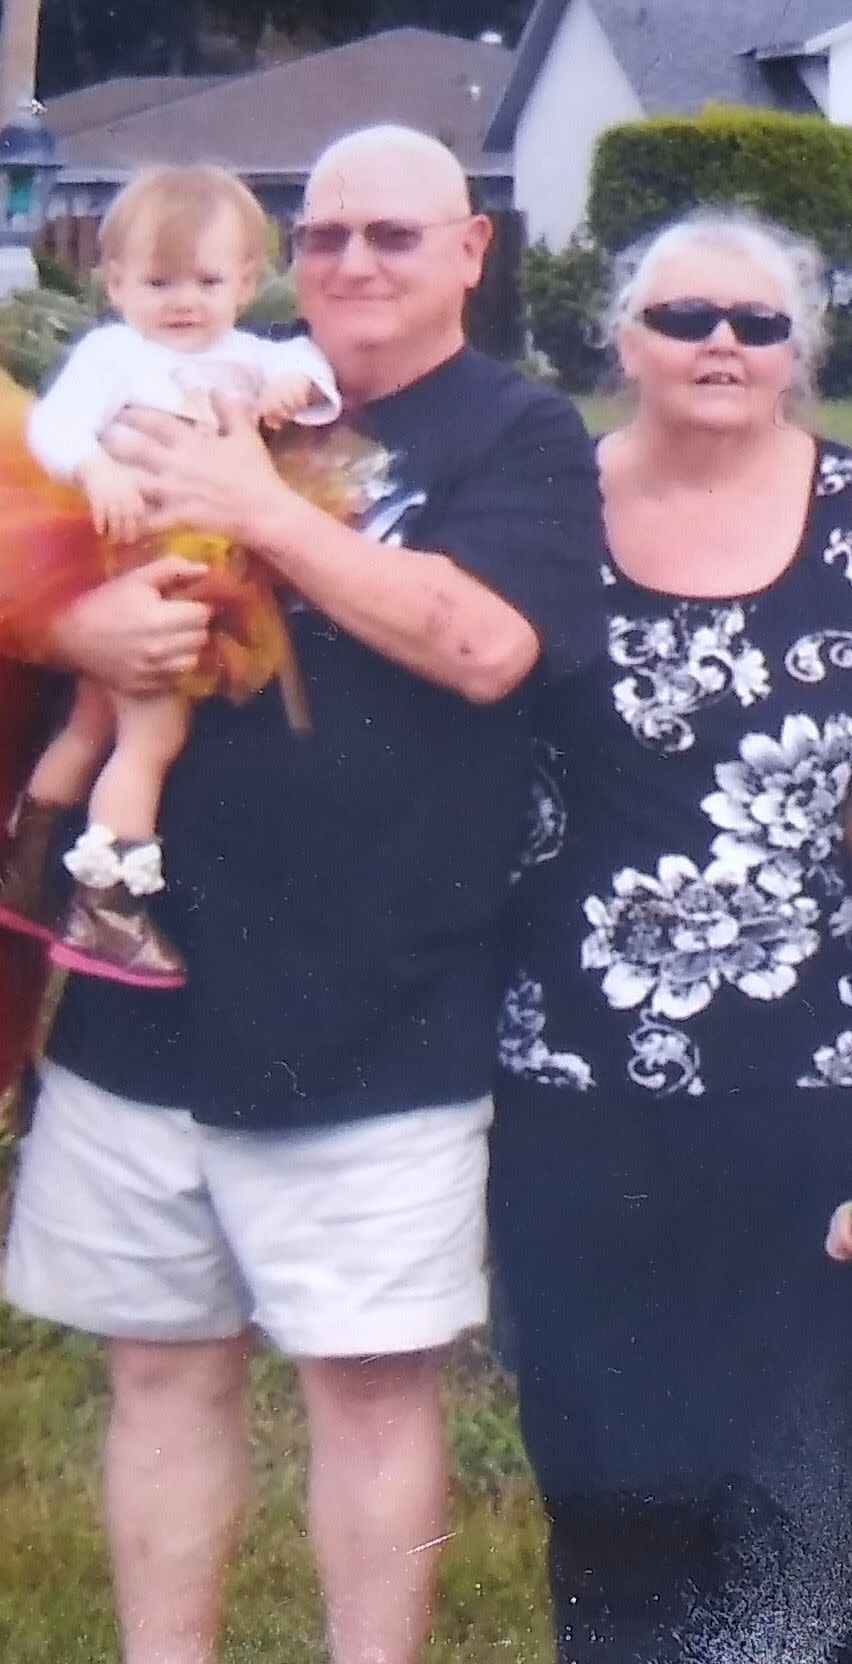 Paul Evans holds his granddaughter, Carly Evans, alongside his wife, Martha Evans, in this photo provided by family. Paul Evans died while attempting to save his grandson, 5-year-old Noah, on Feb. 6, 2019.